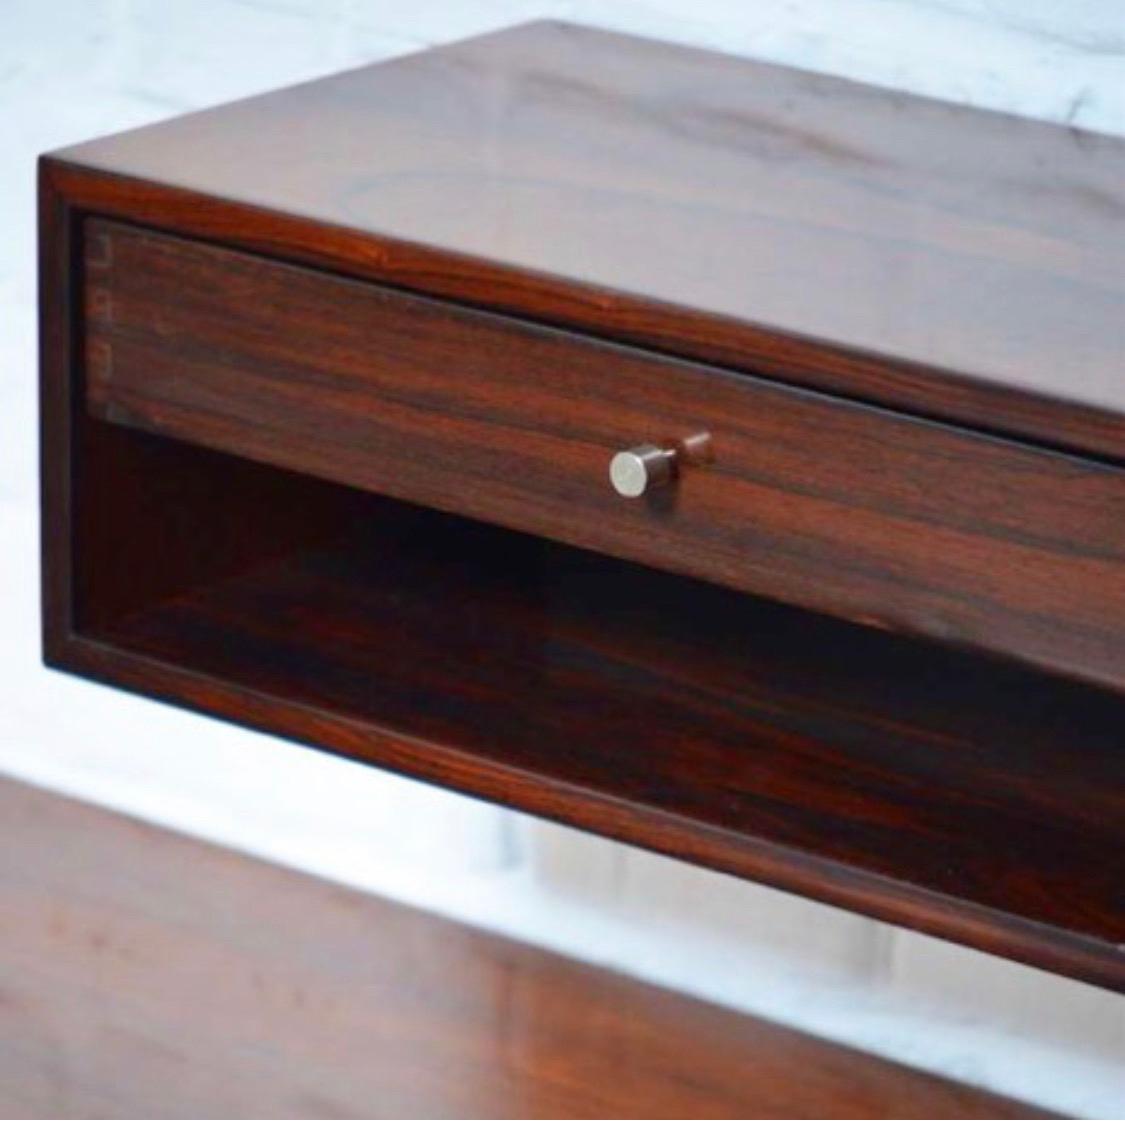 This is a pair of floating consoles/ nightstands. The model is extremely rare and rarely offered in rosewood. Made of the finest veneer. The drawer is made of massive rosewood and the joinery on the sides offer a nice pattern. Perfect as nightstands